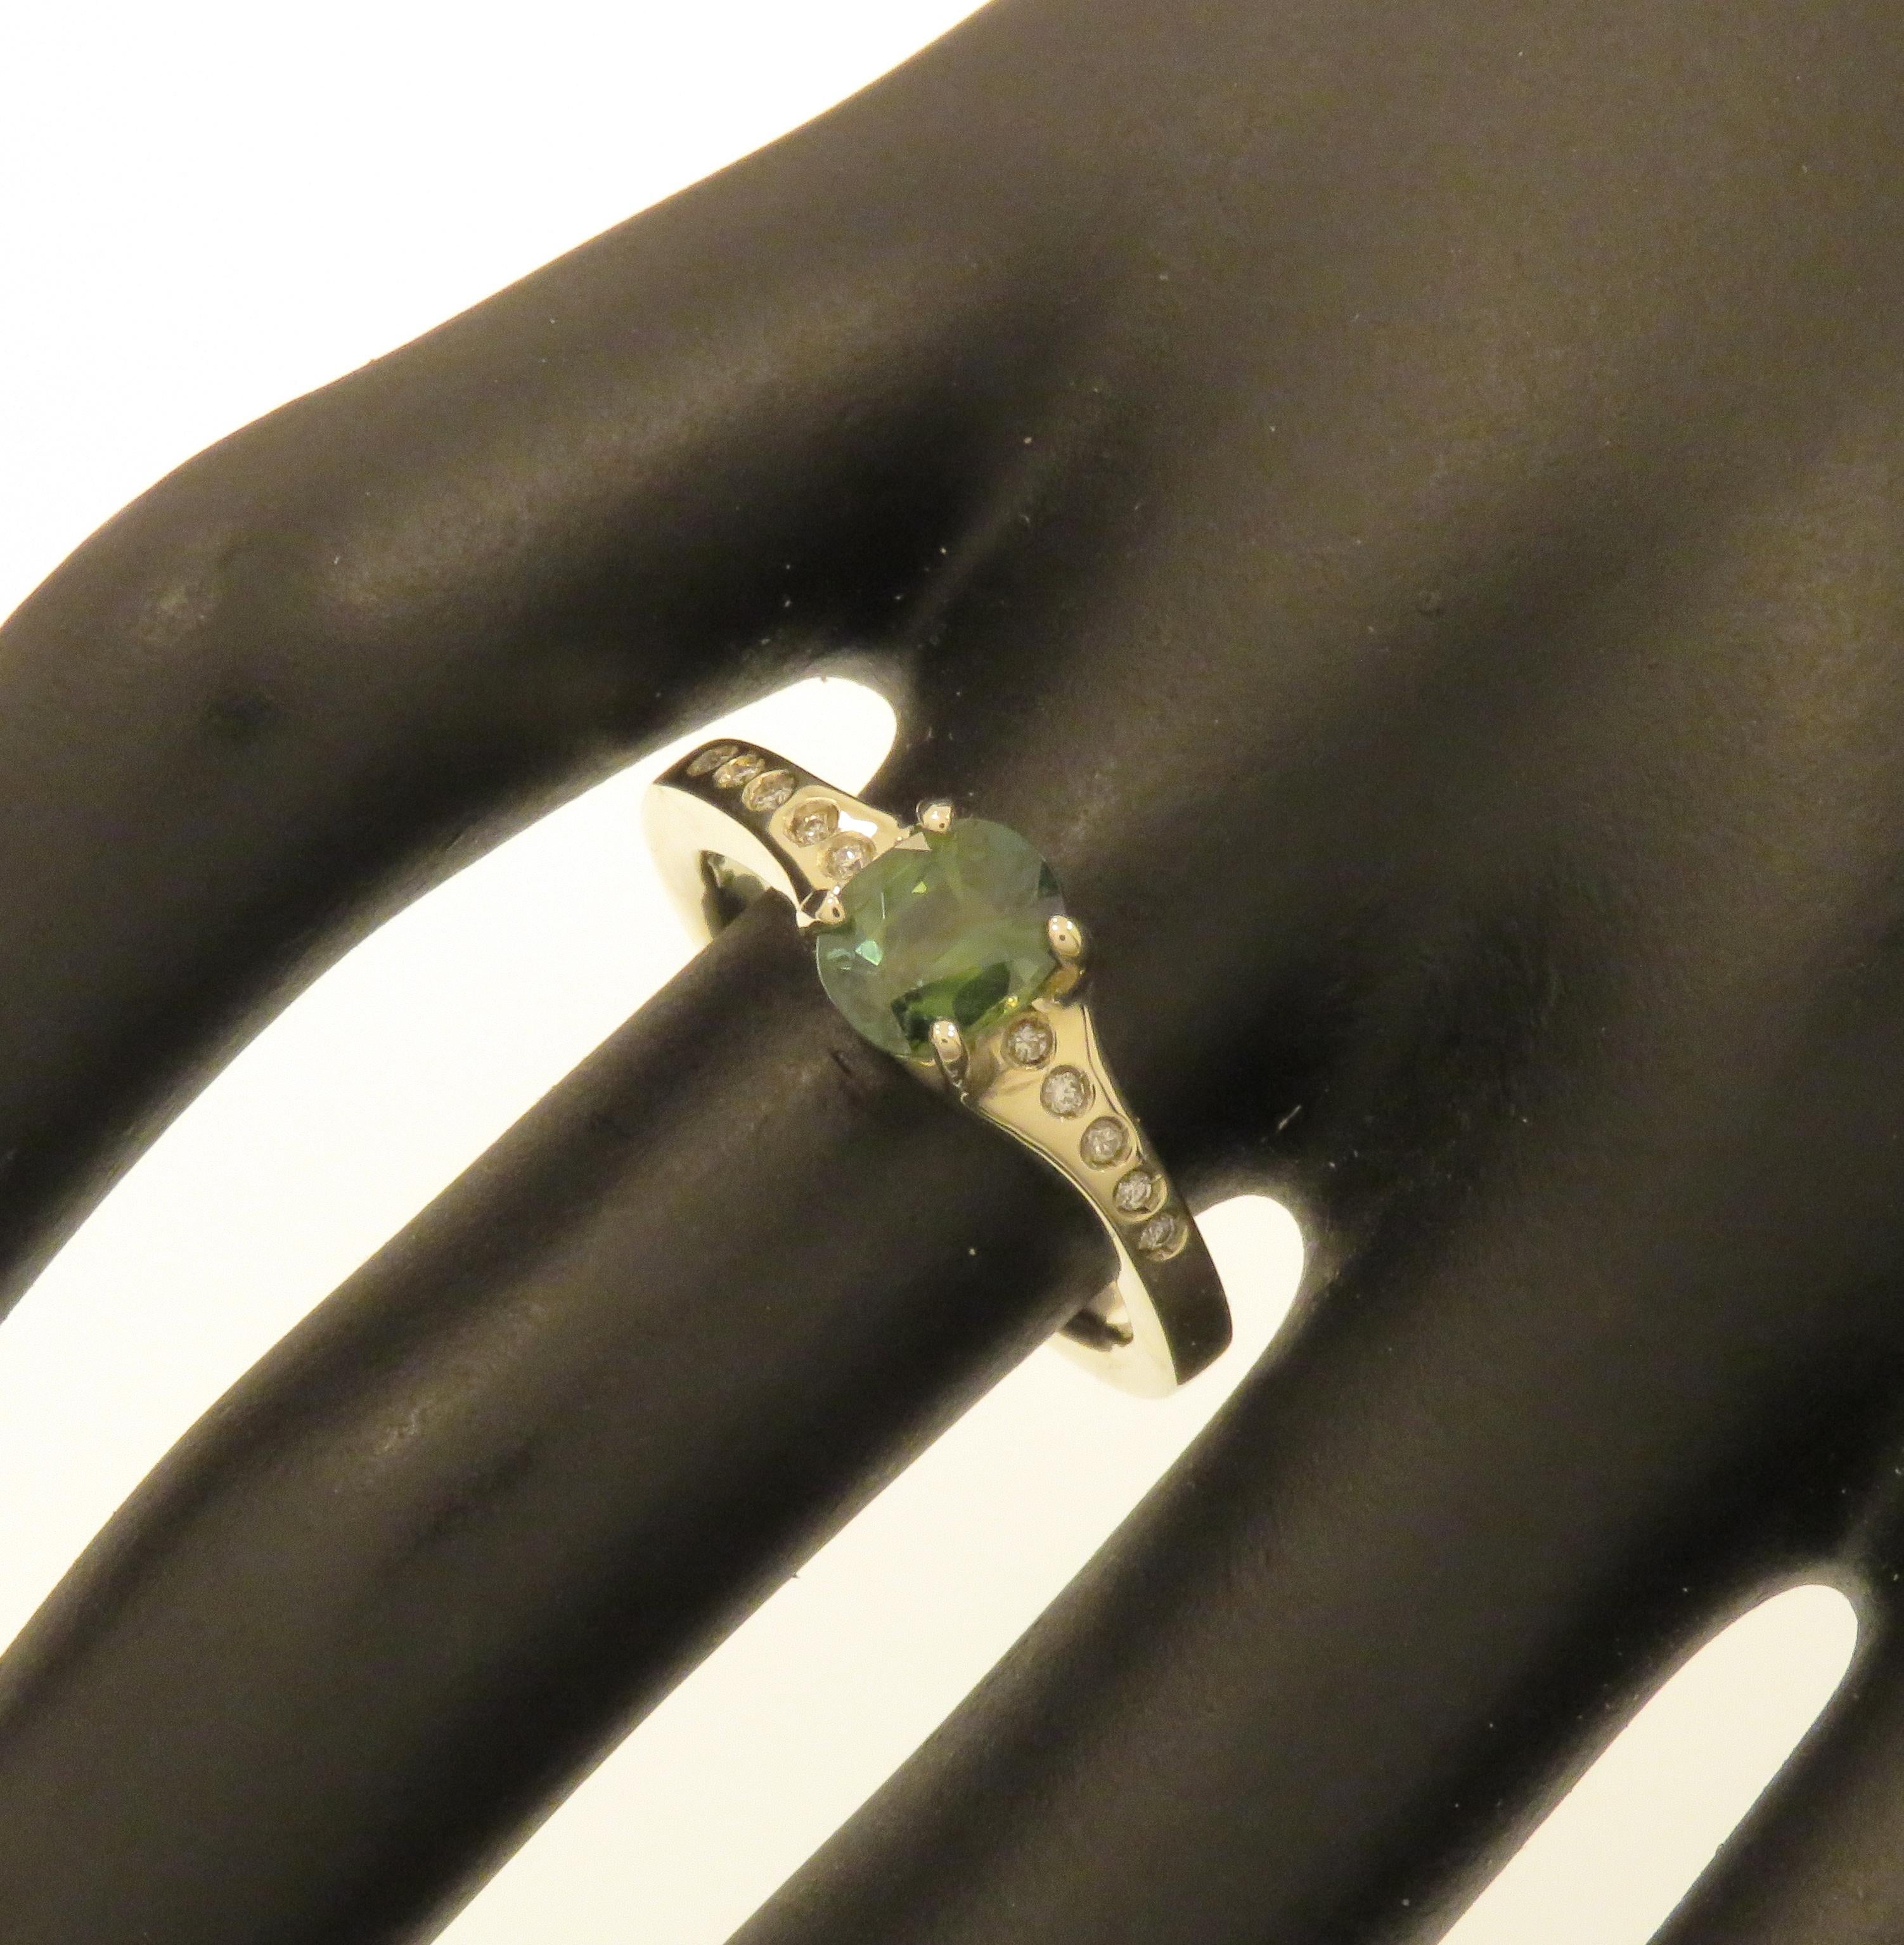 Stunning solitaire ring featuring a natural green sapphire oval cut and 10 diamonds on the ring shoulders. Handmade in 9k white gold. Marked with the Italian gold mark 375 and Botta Gioielli brandmark 716MI.

Handcrafted in: 9k white gold.
1 natural